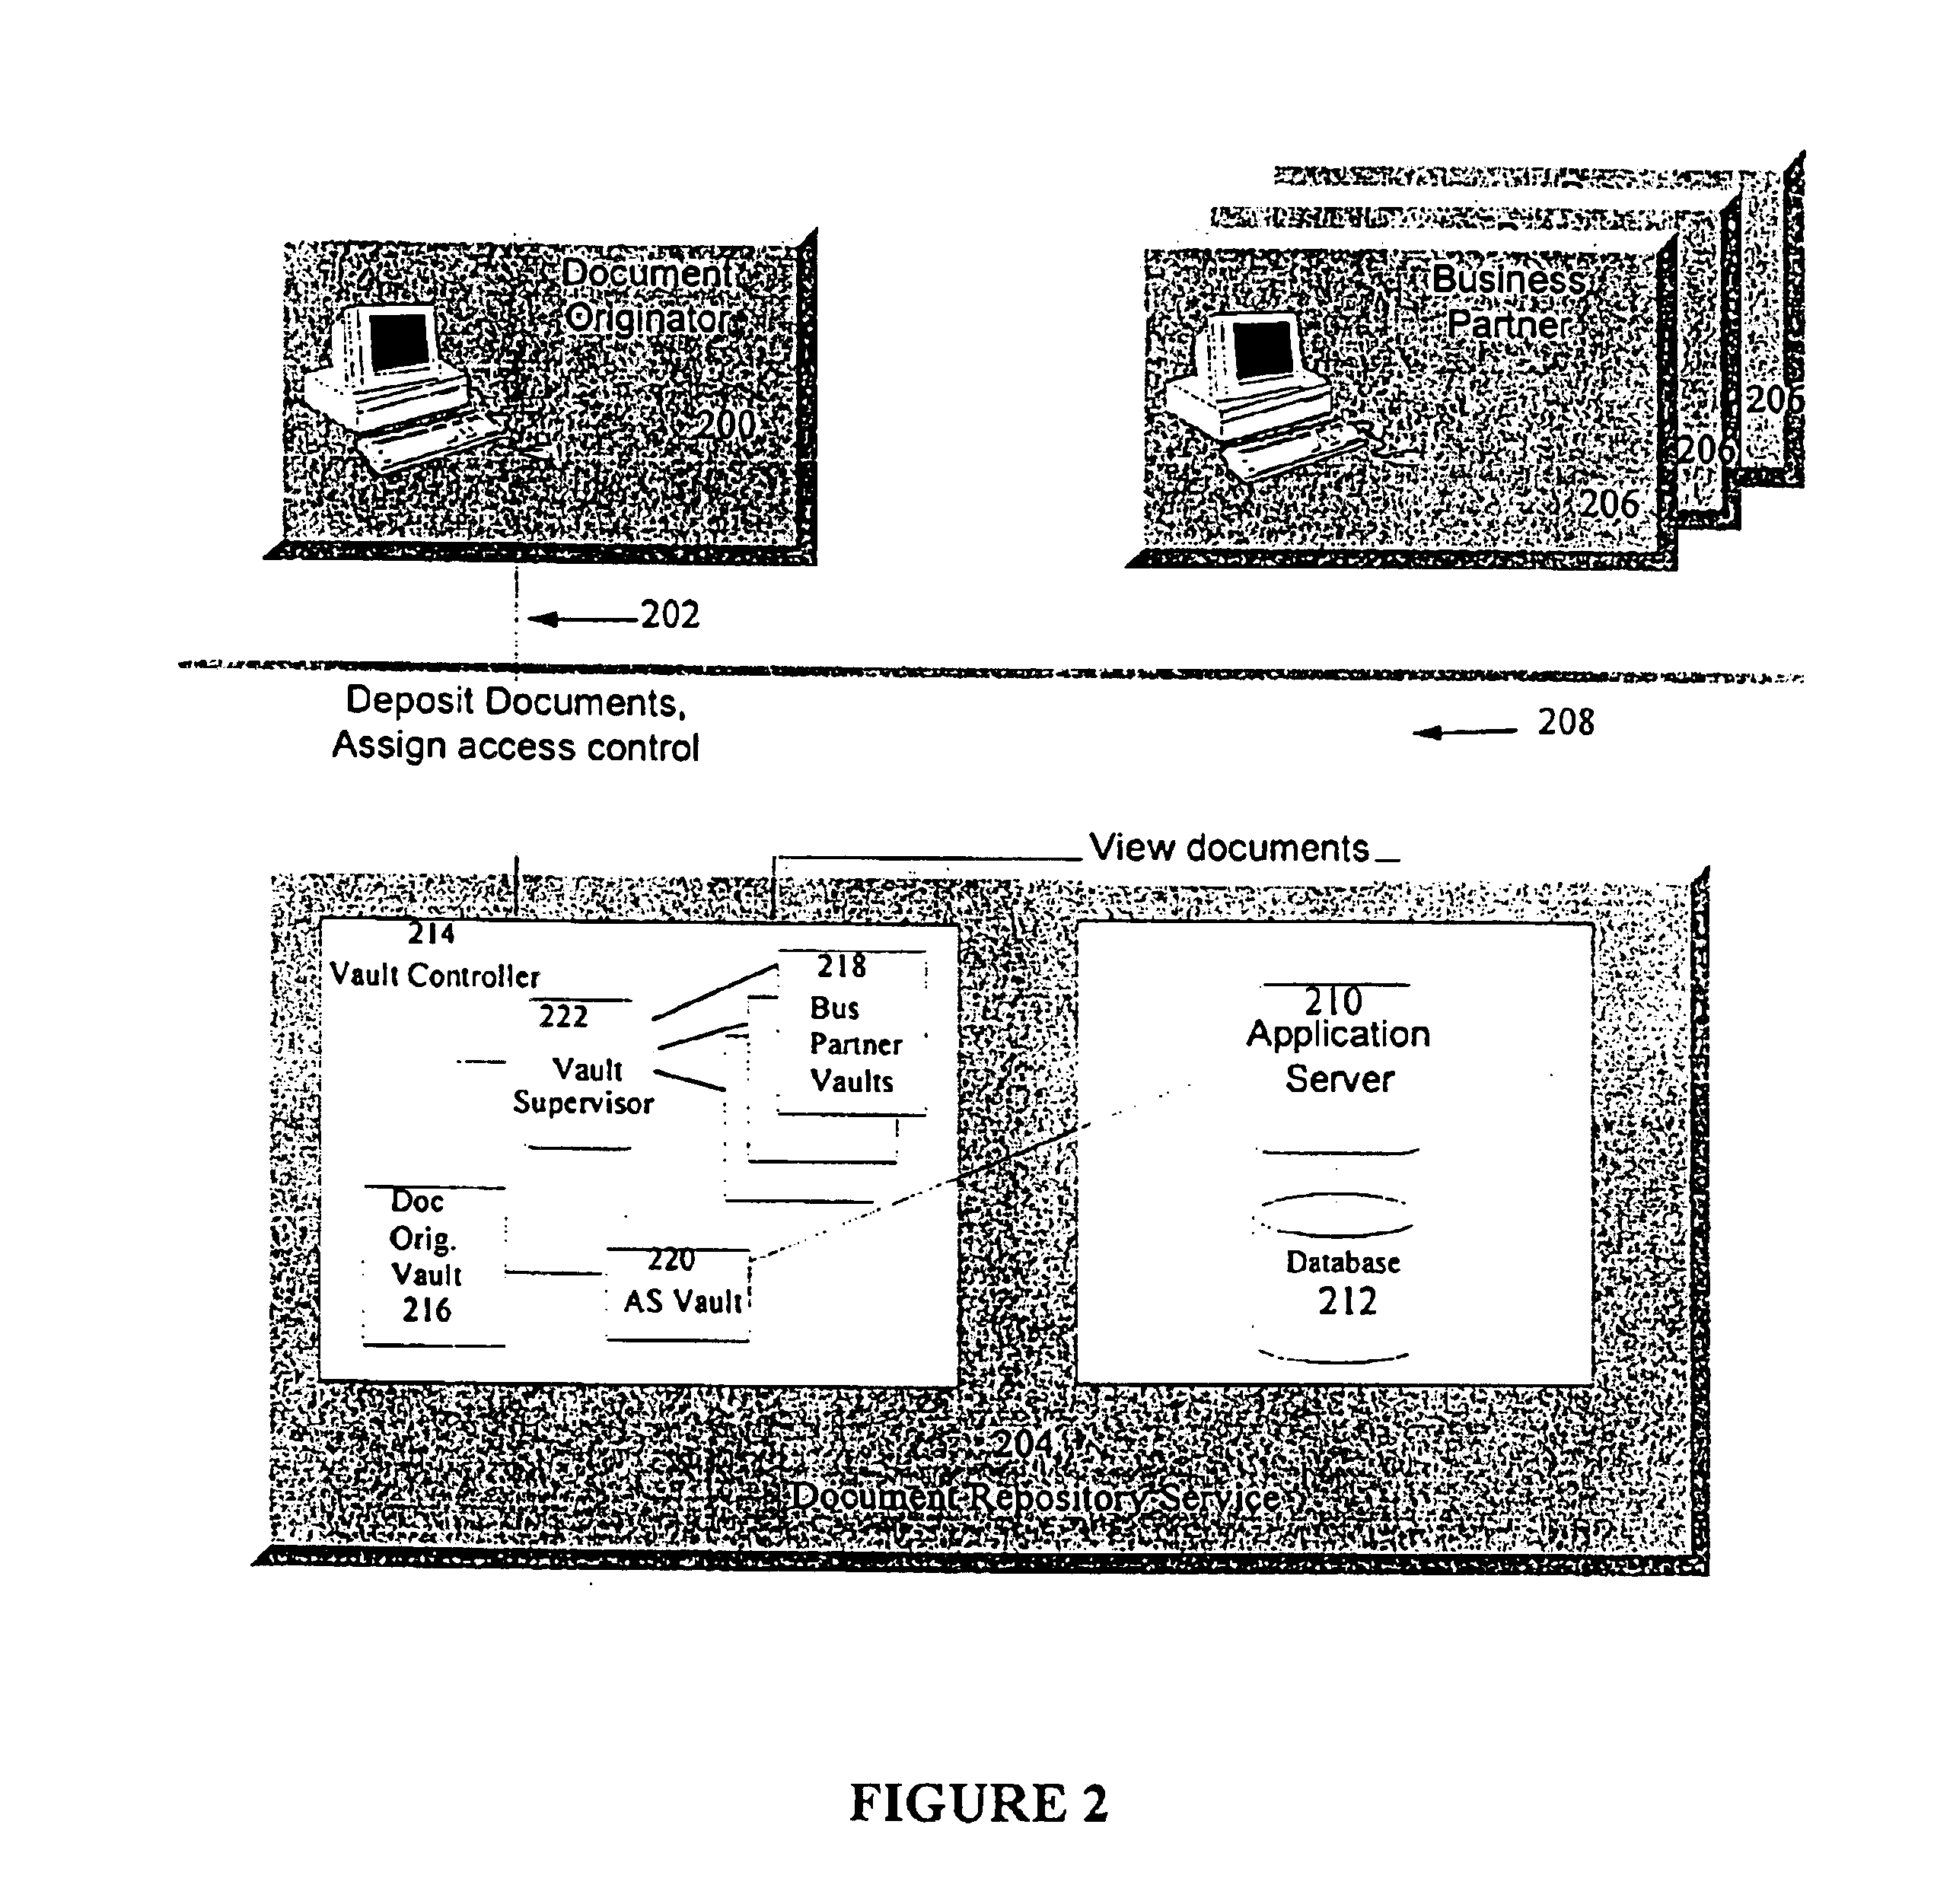 System for electronic repository of data enforcing access control on data retrieval